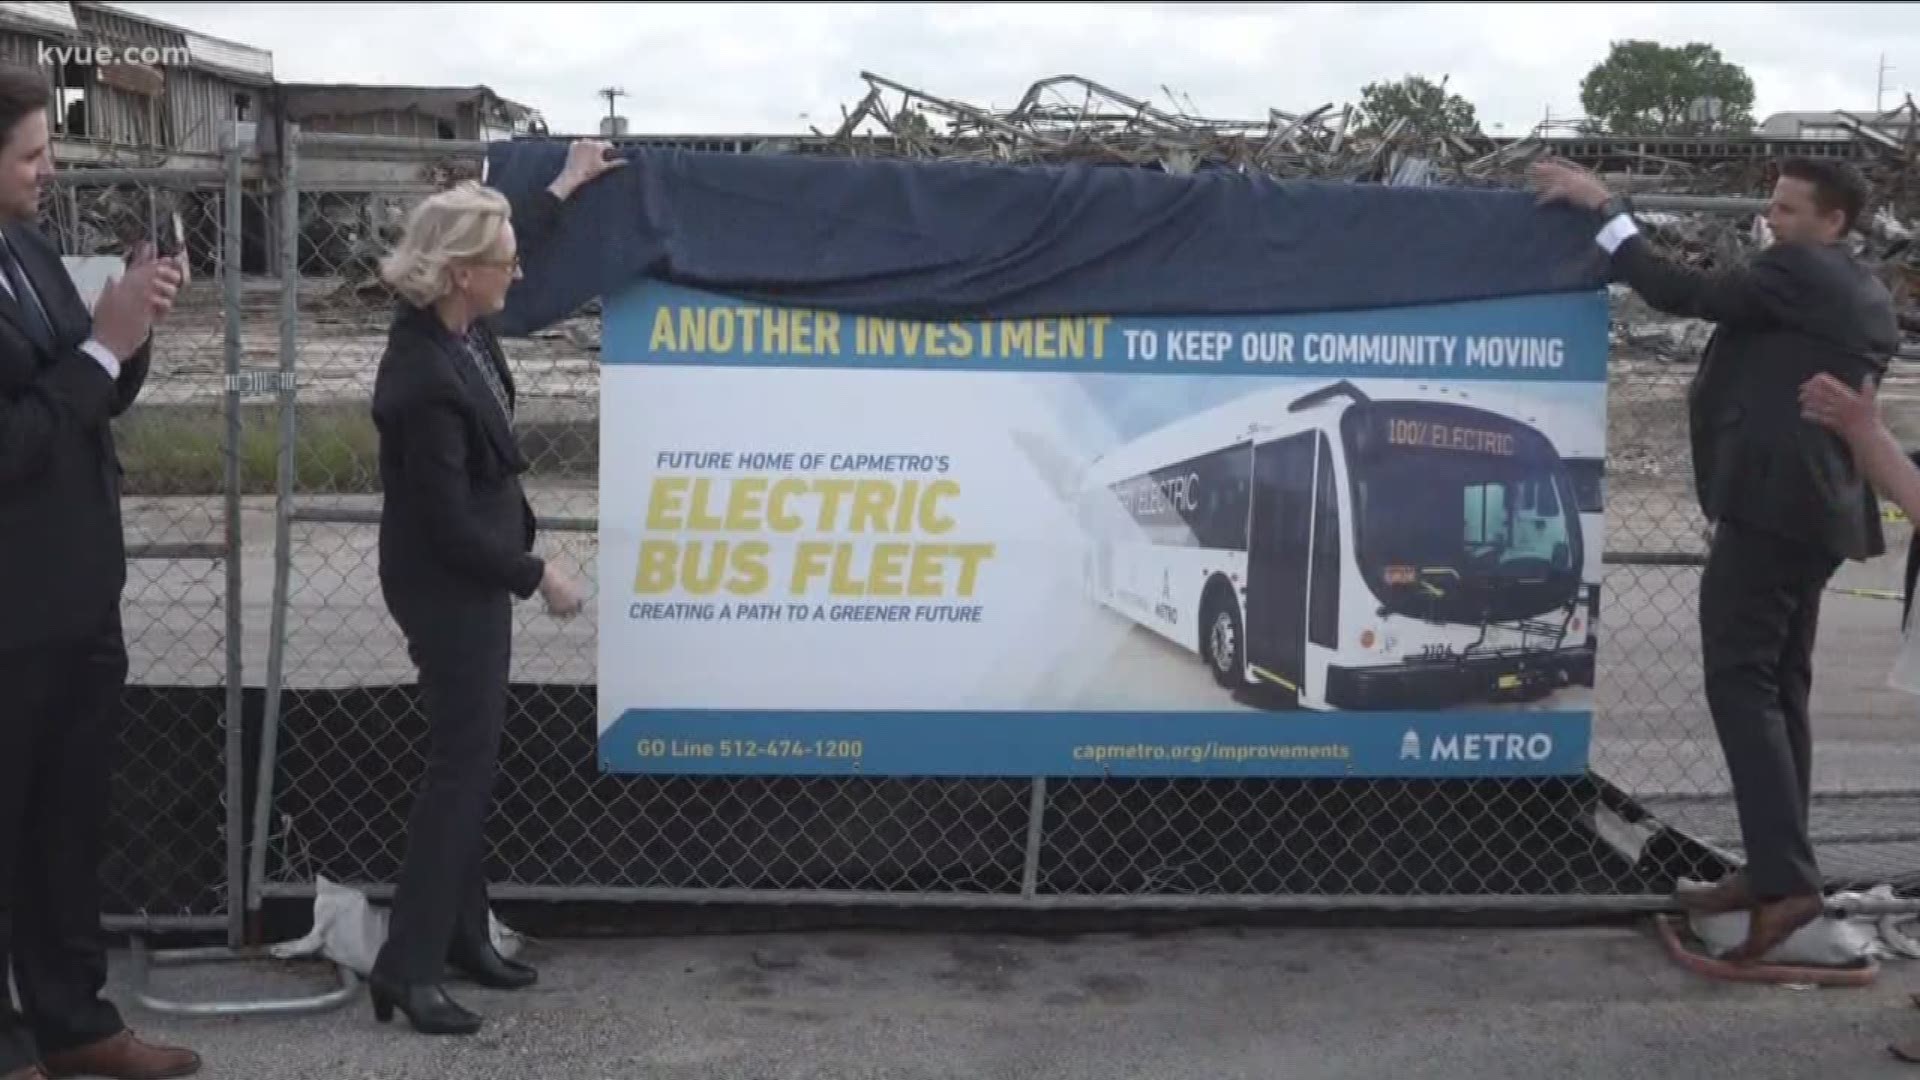 Capital Metro leaders announced plans for an all-electric bus fleet Monday morning. An old building in North Austin will be demolished to become a new 'smart charging yard' for the buses.